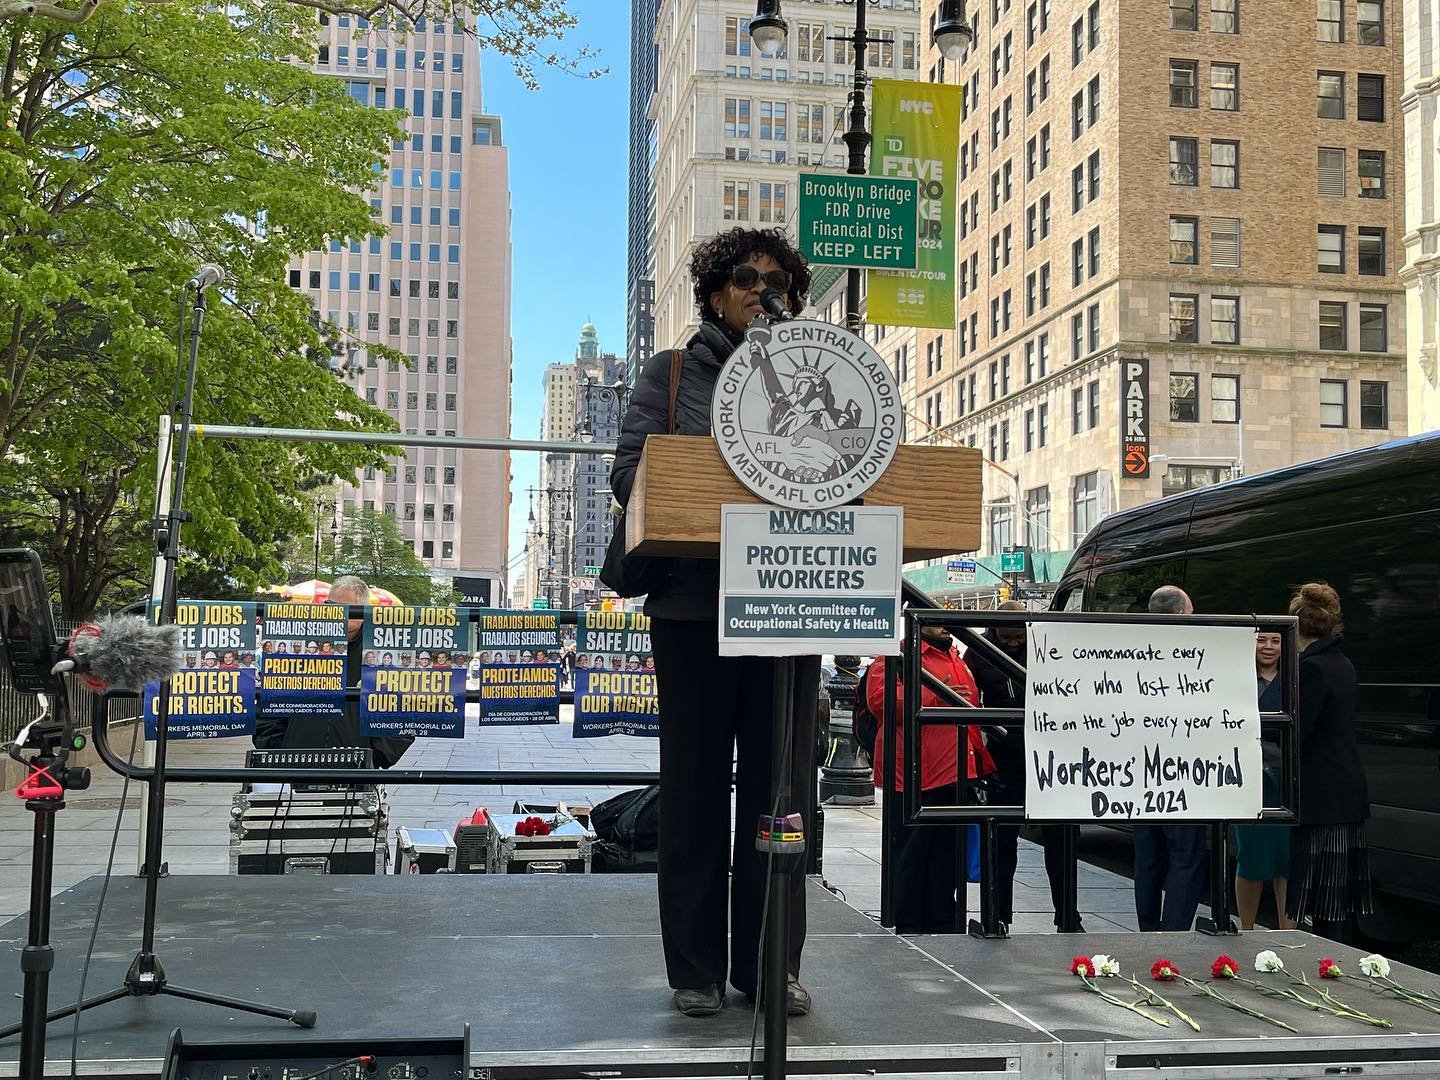 We were proud to join @centrallabornyc @nycoshofficial @retailaction @workers.united1 in City Hall Park today to commemorate #WorkersMemorialDay. We gathered both to mourn those who we&rsquo;ve lost over the past year and to recommit to the fight for